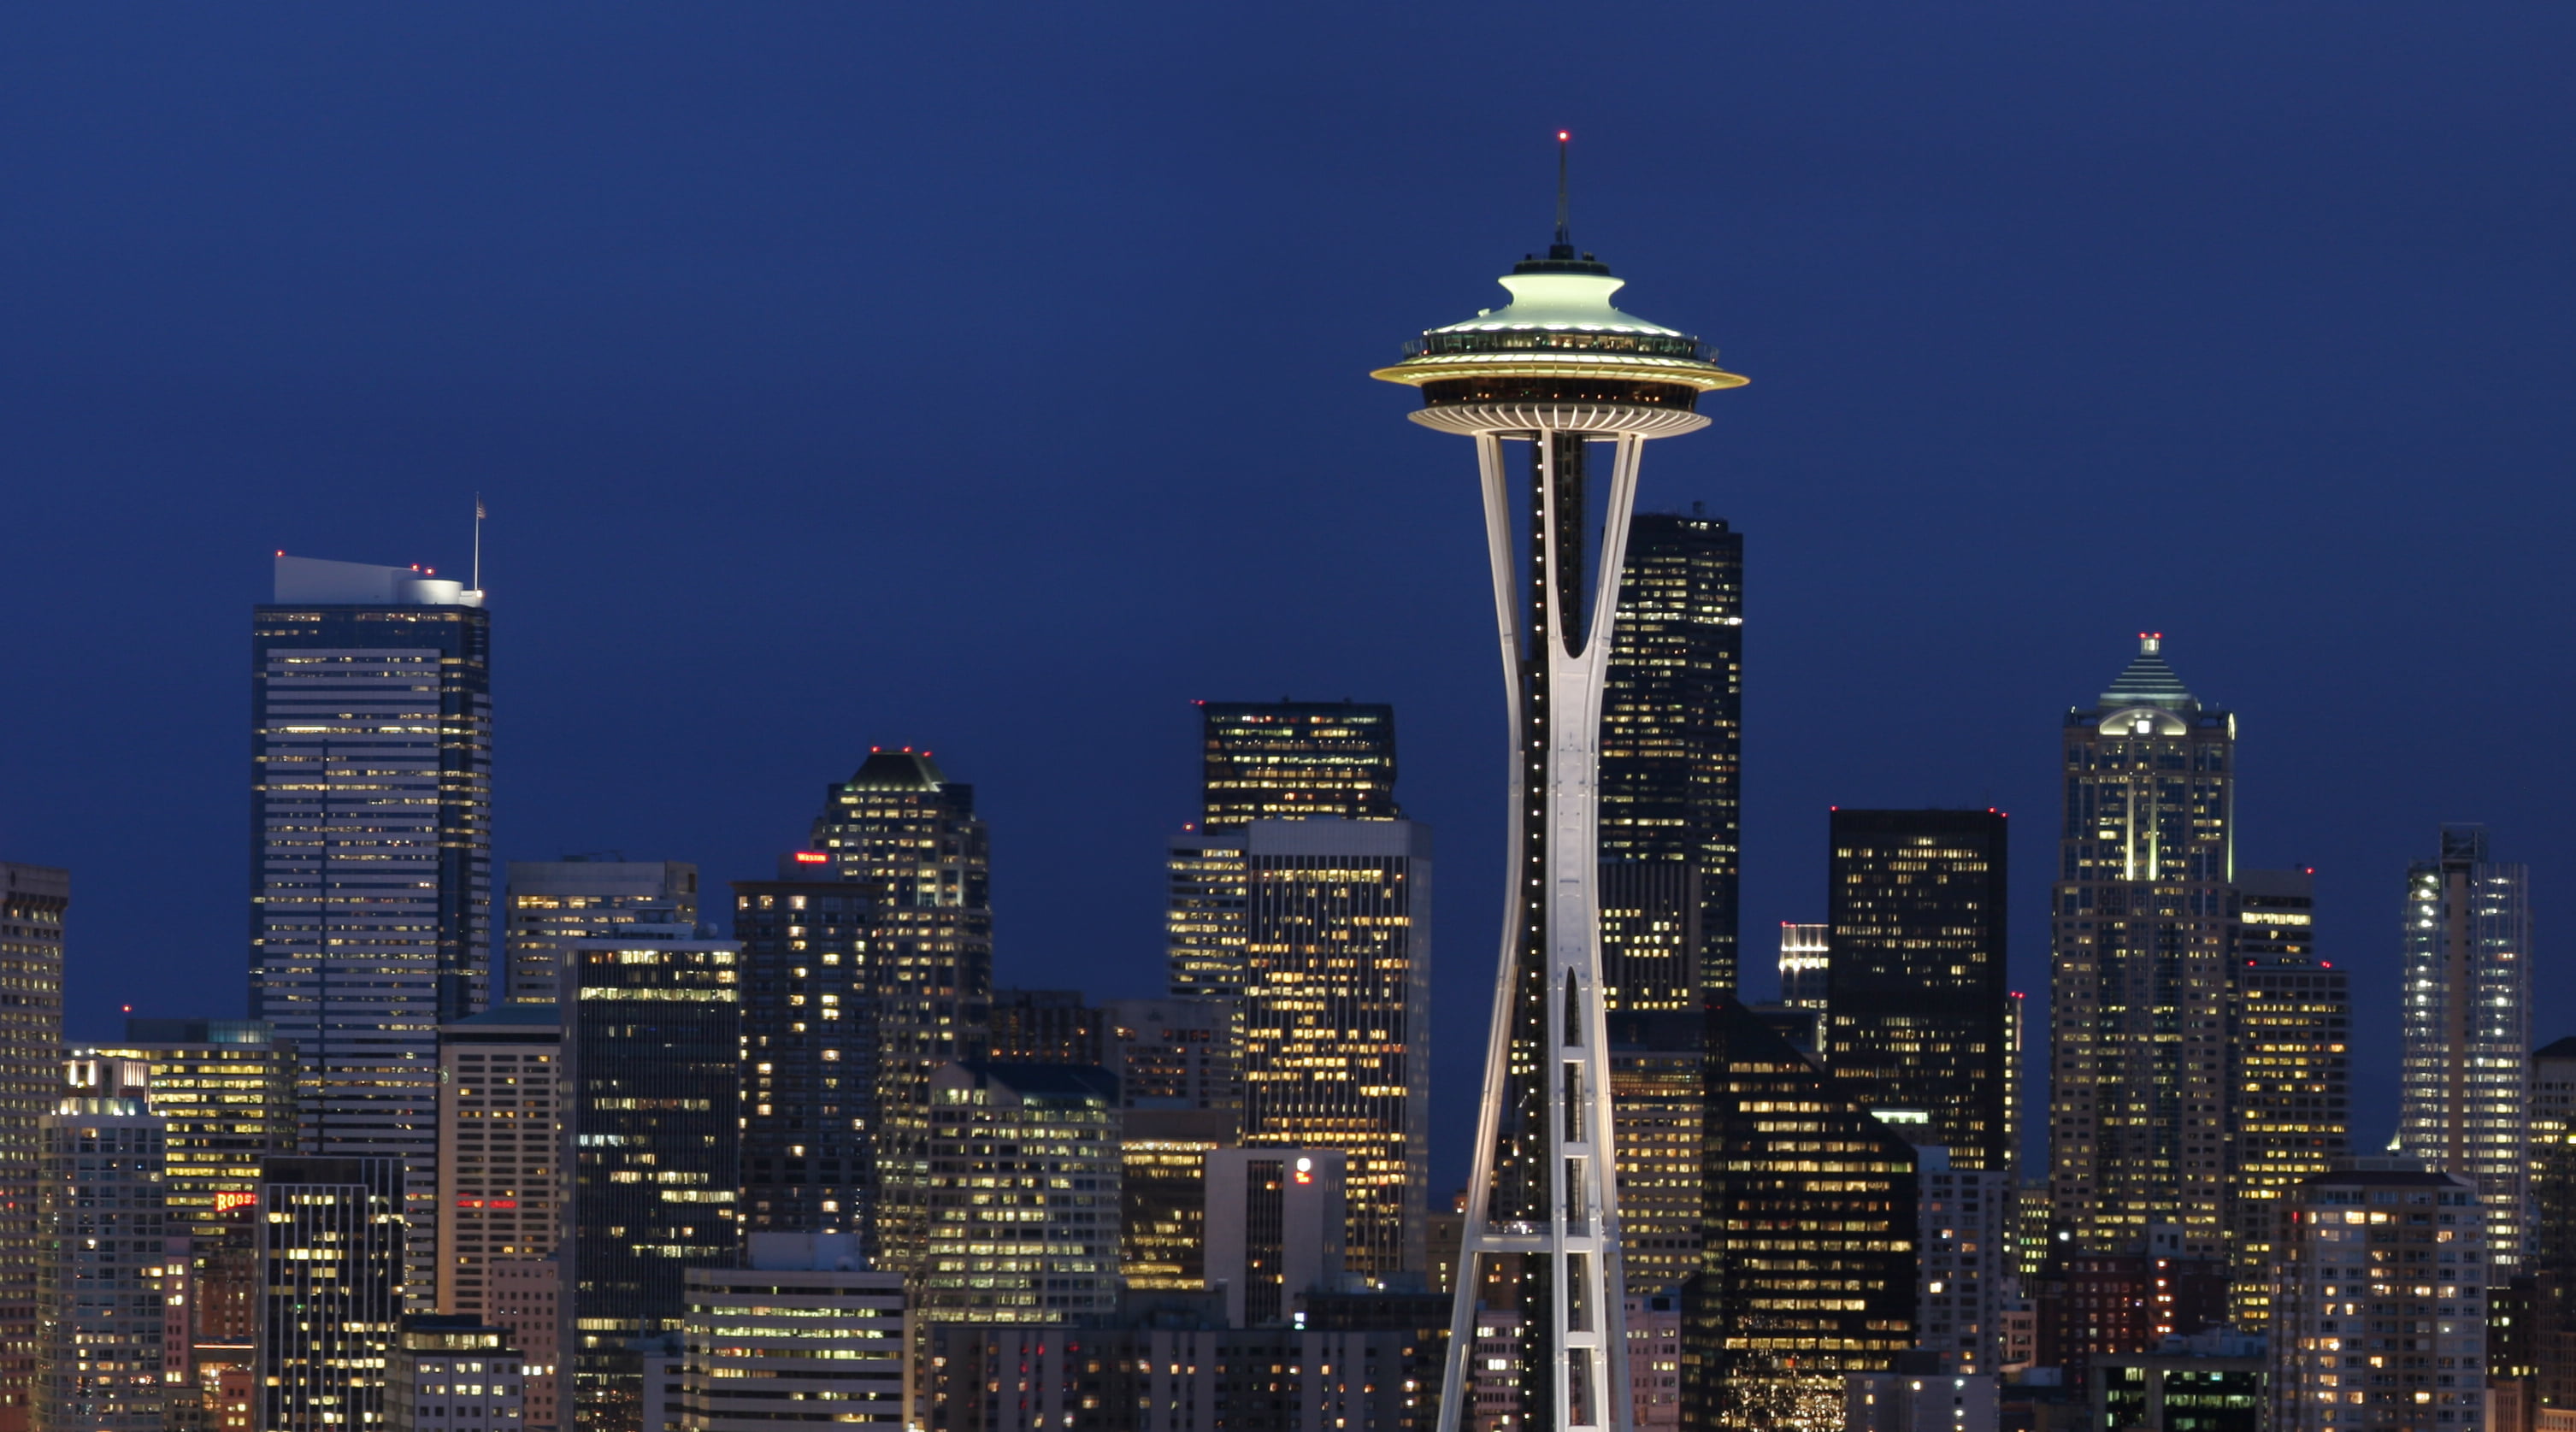 city buildings during night time, seattle, seattle, Skyline, Kerry Park